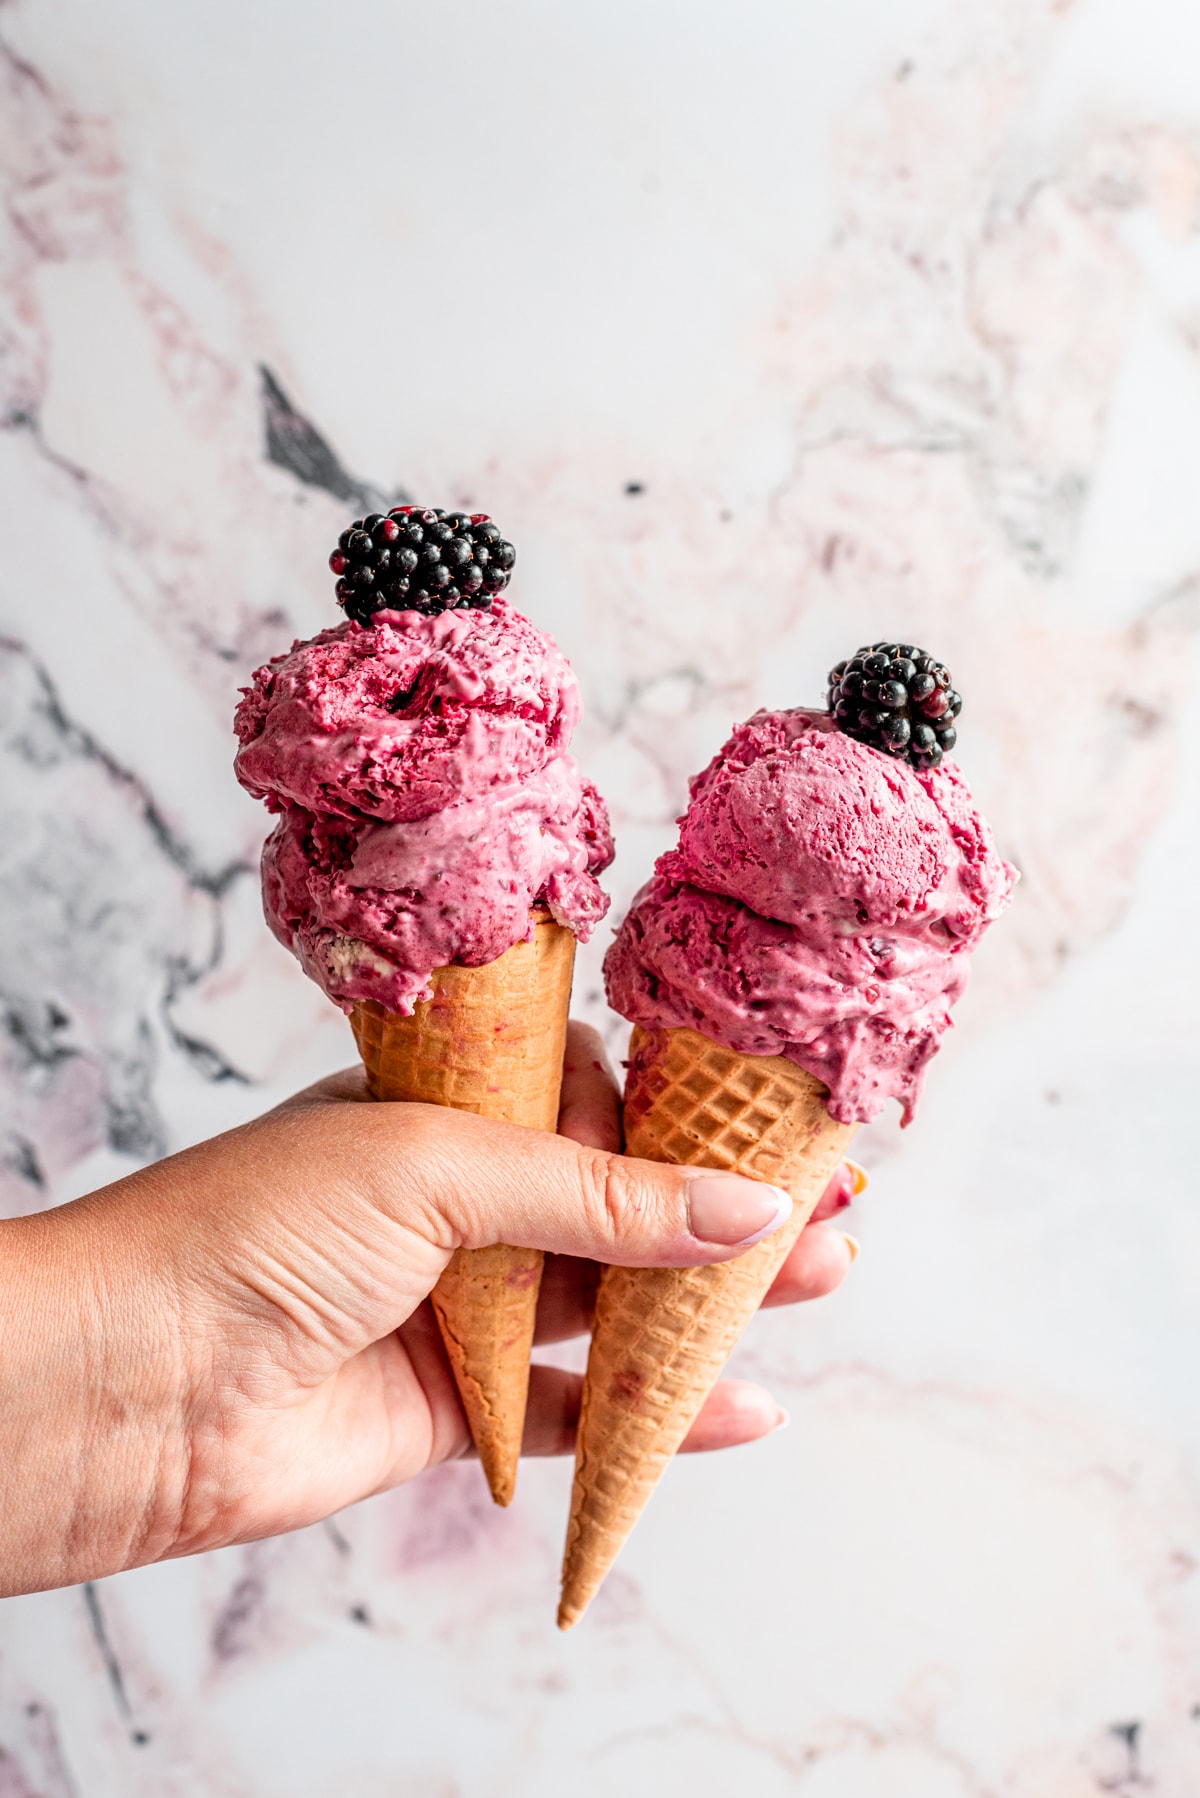 A hand holding two ice cream cones filled with blackberry ice cream with two blackberries on top.